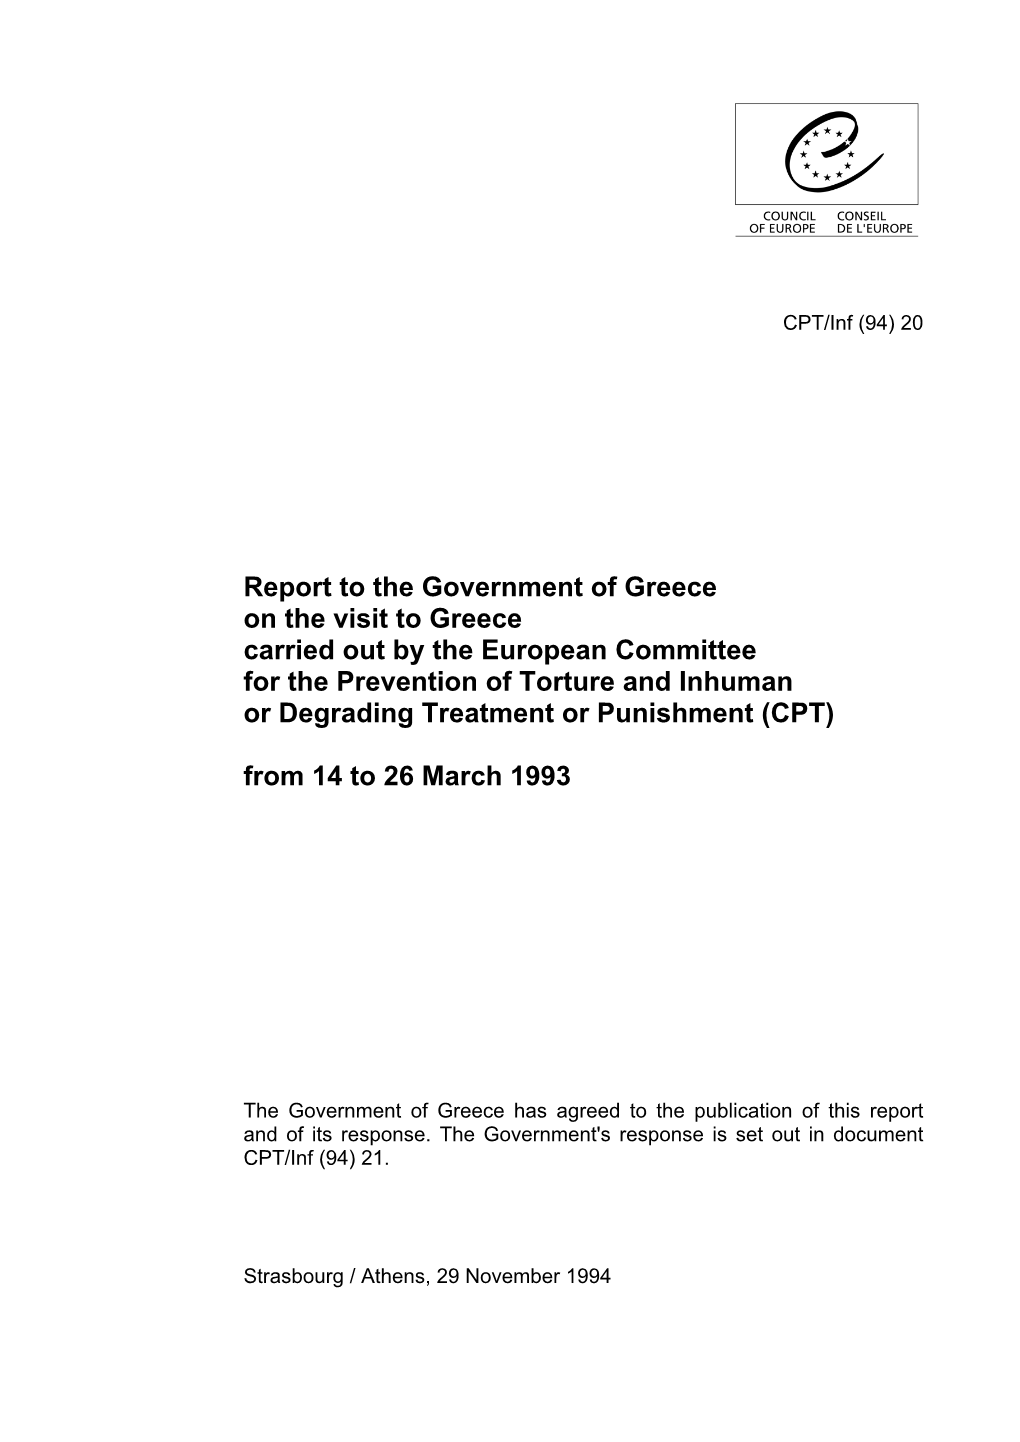 Report to the Government of Greece